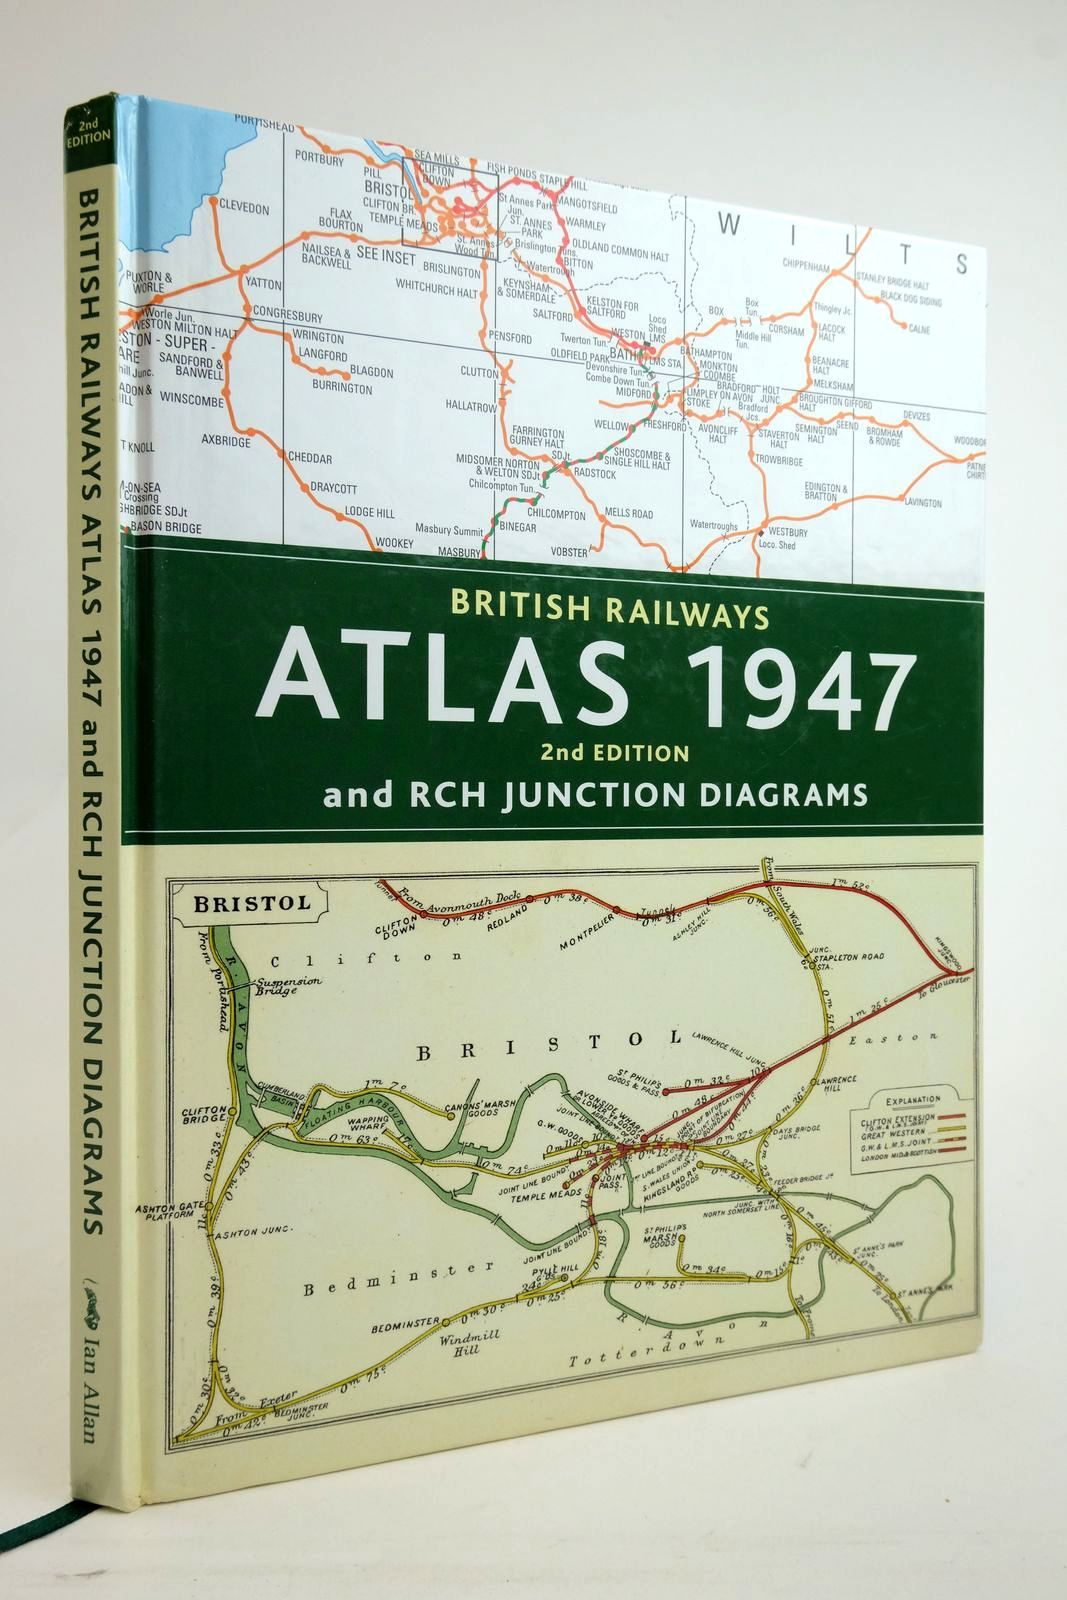 Photo of BRITISH RAILWAYS ATLAS 1947 AND RCH JUNCTION DIAGRAMS published by Ian Allan (STOCK CODE: 2136359)  for sale by Stella & Rose's Books